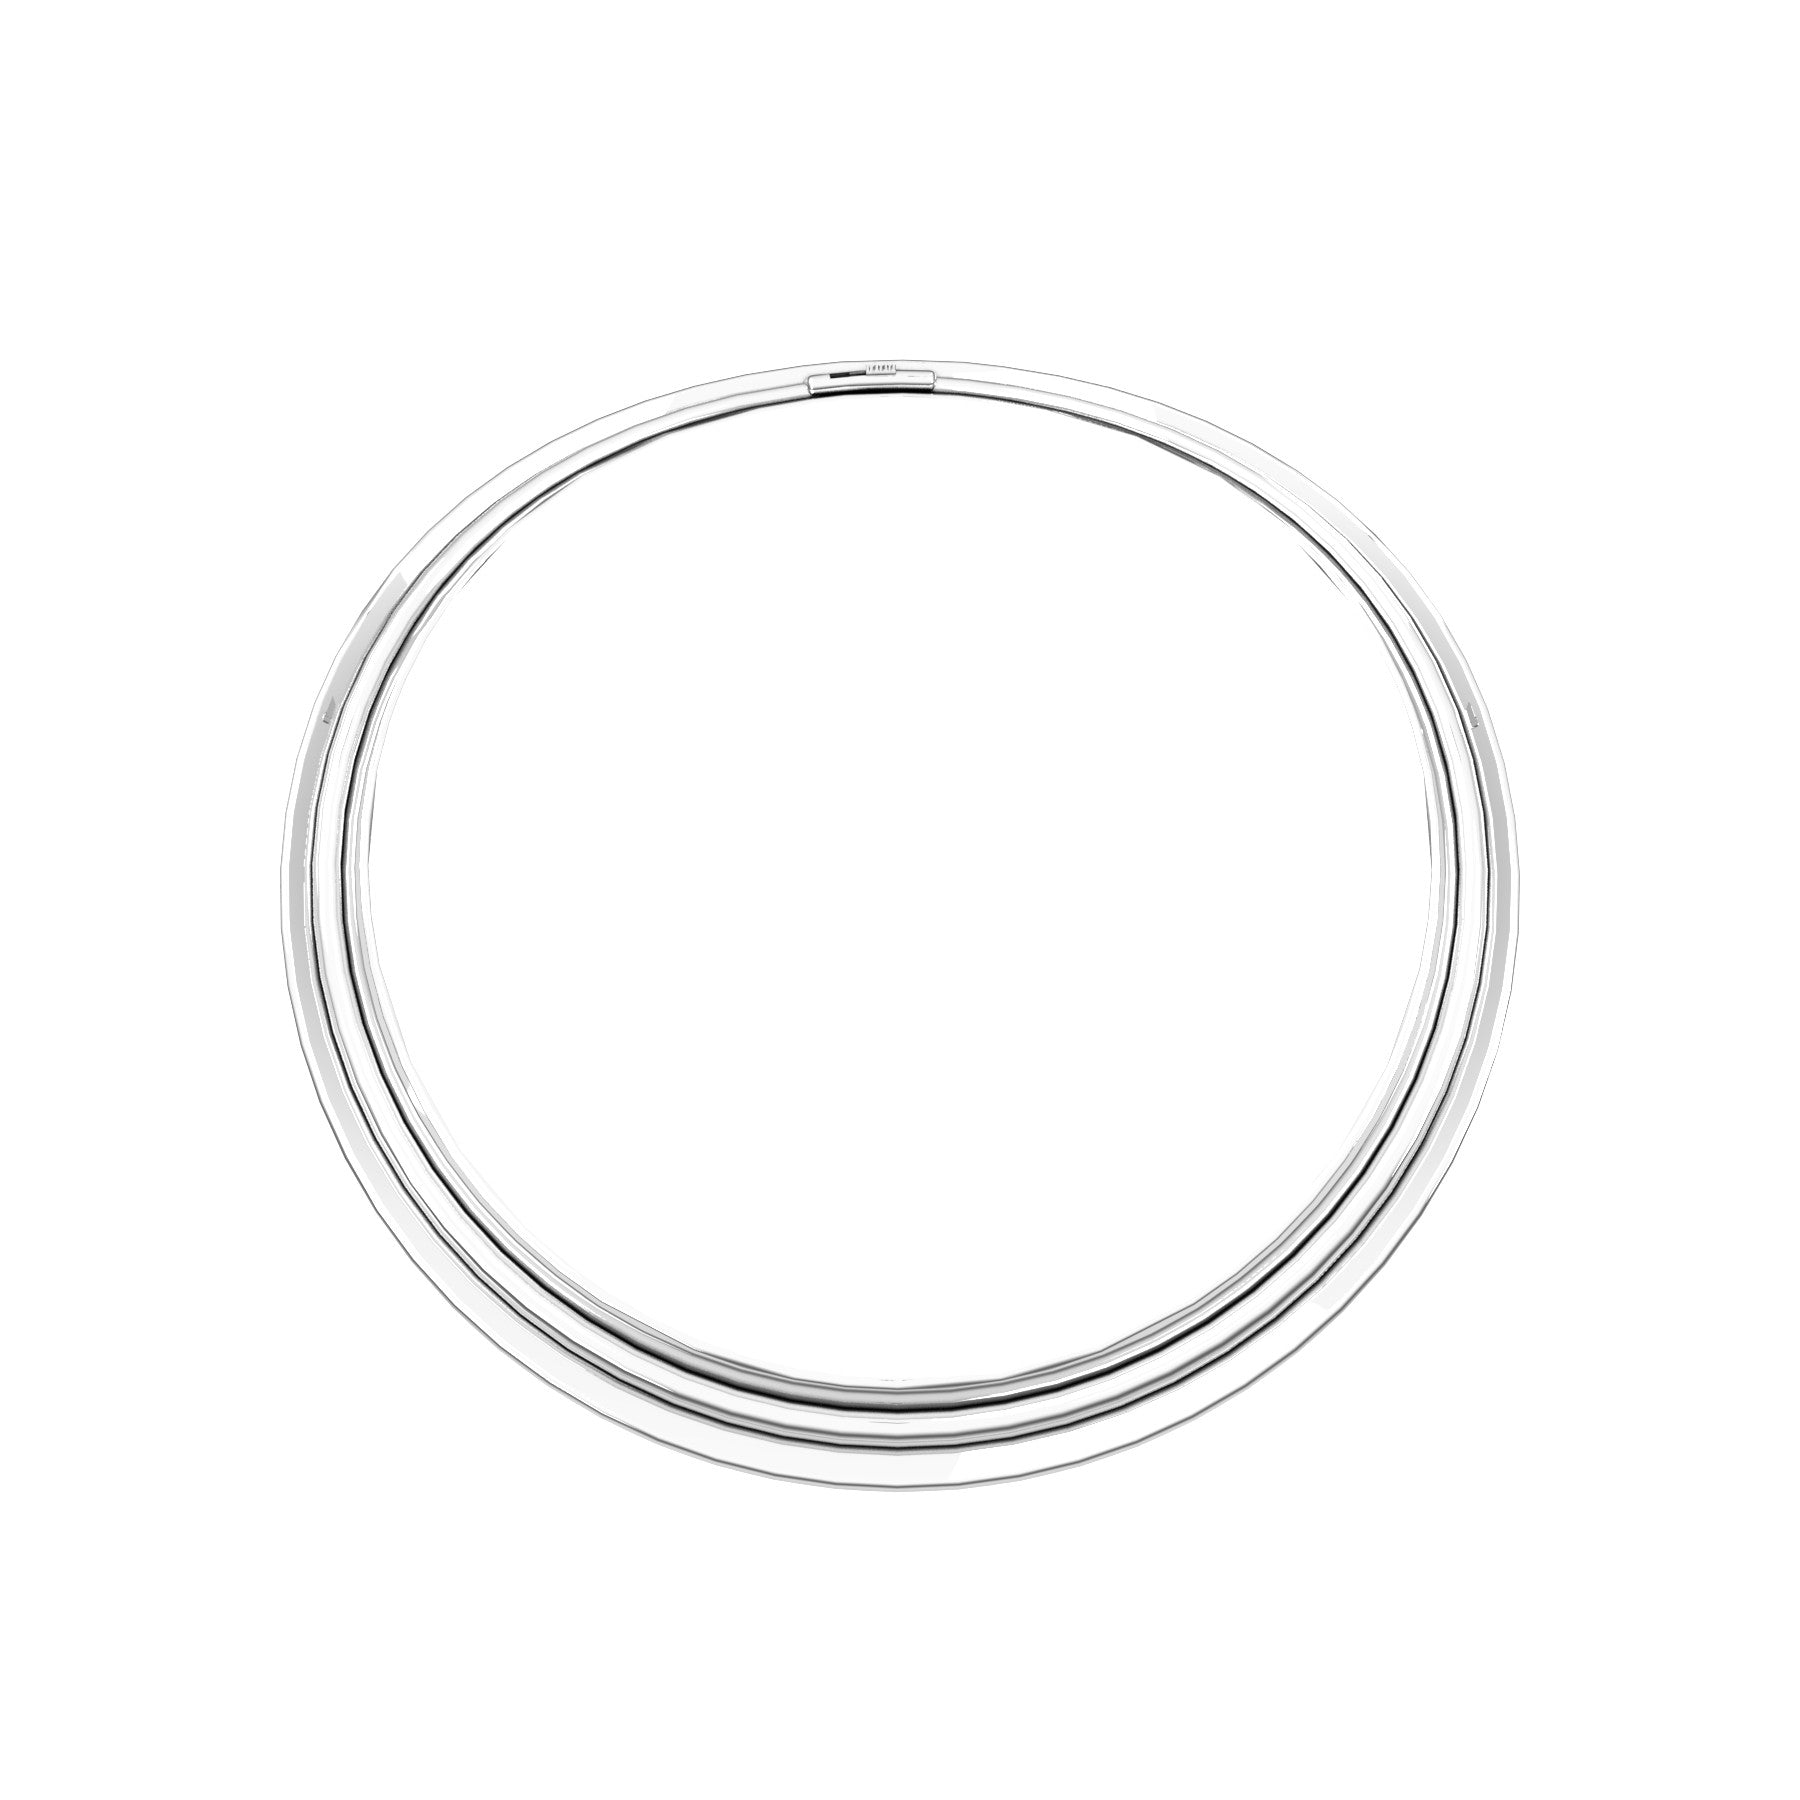 bobo rigid necklace, sterling silver, weight about 60 g. (2.11 oz) width 13,7 mm max